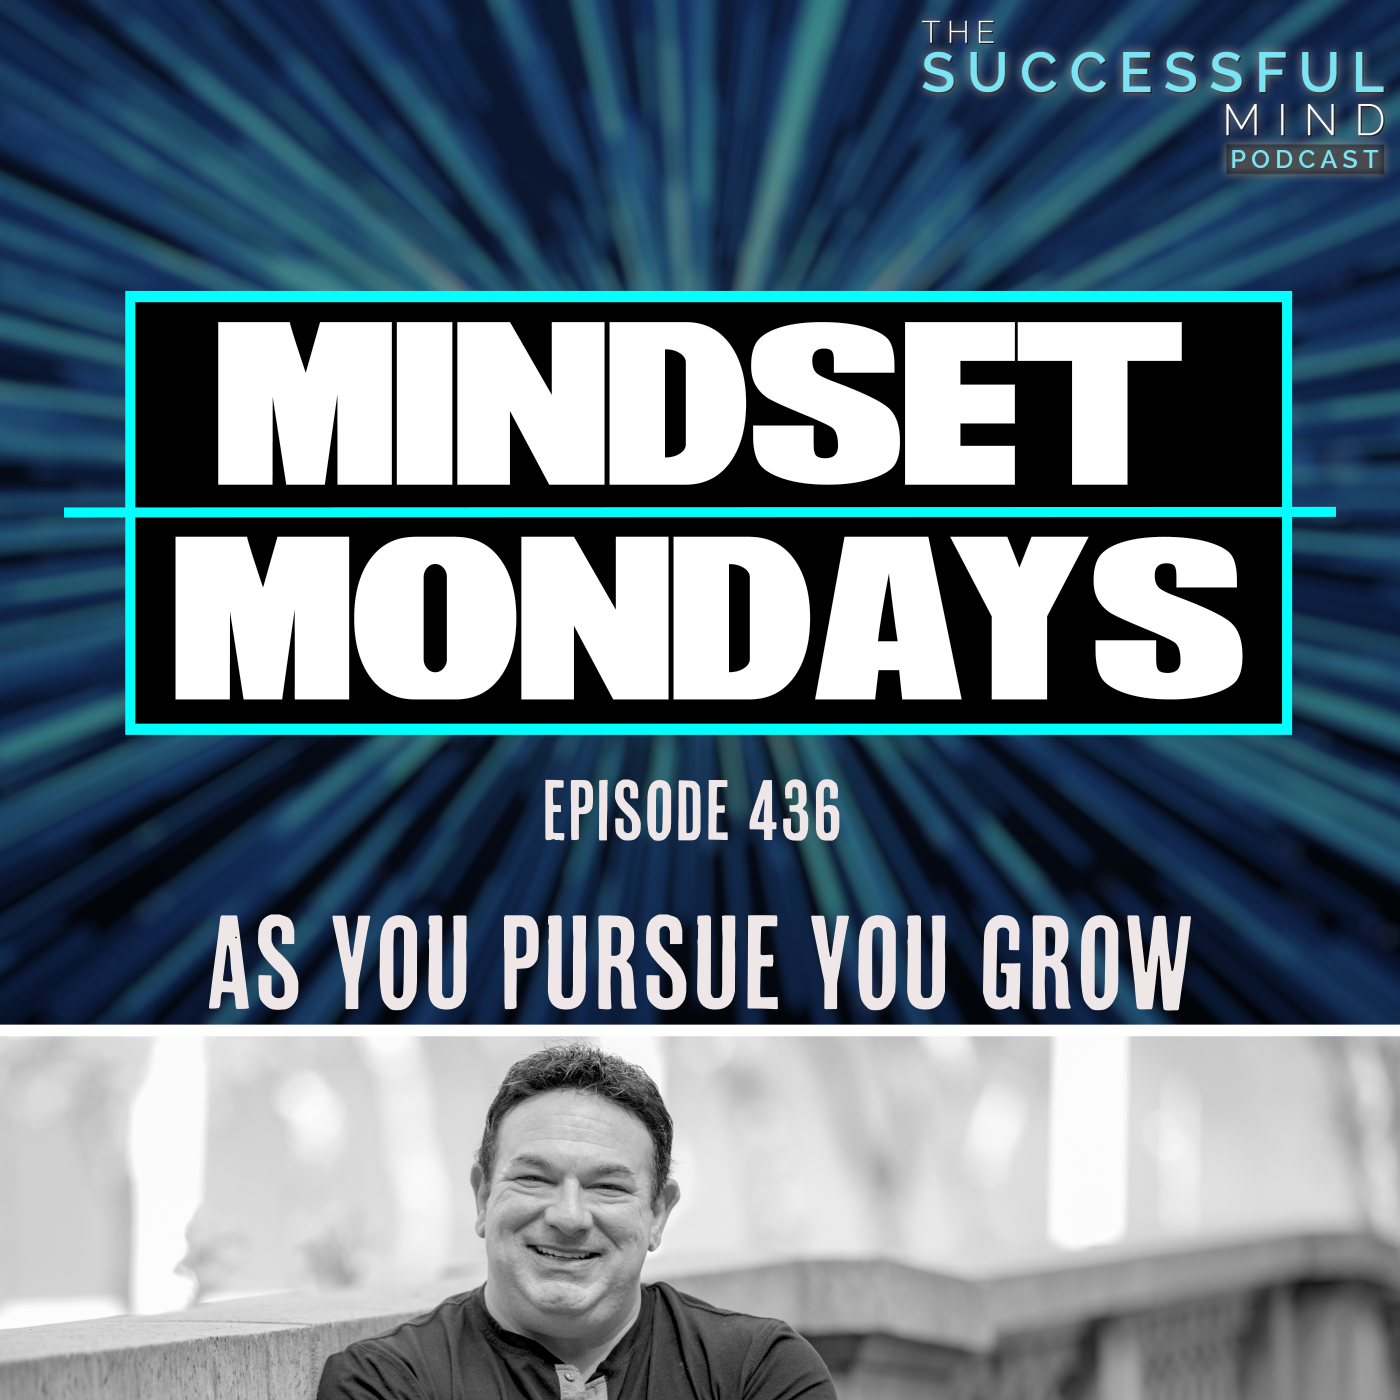 The Successful Mind Podcast - Episode 436 - As You Pursue You Grow